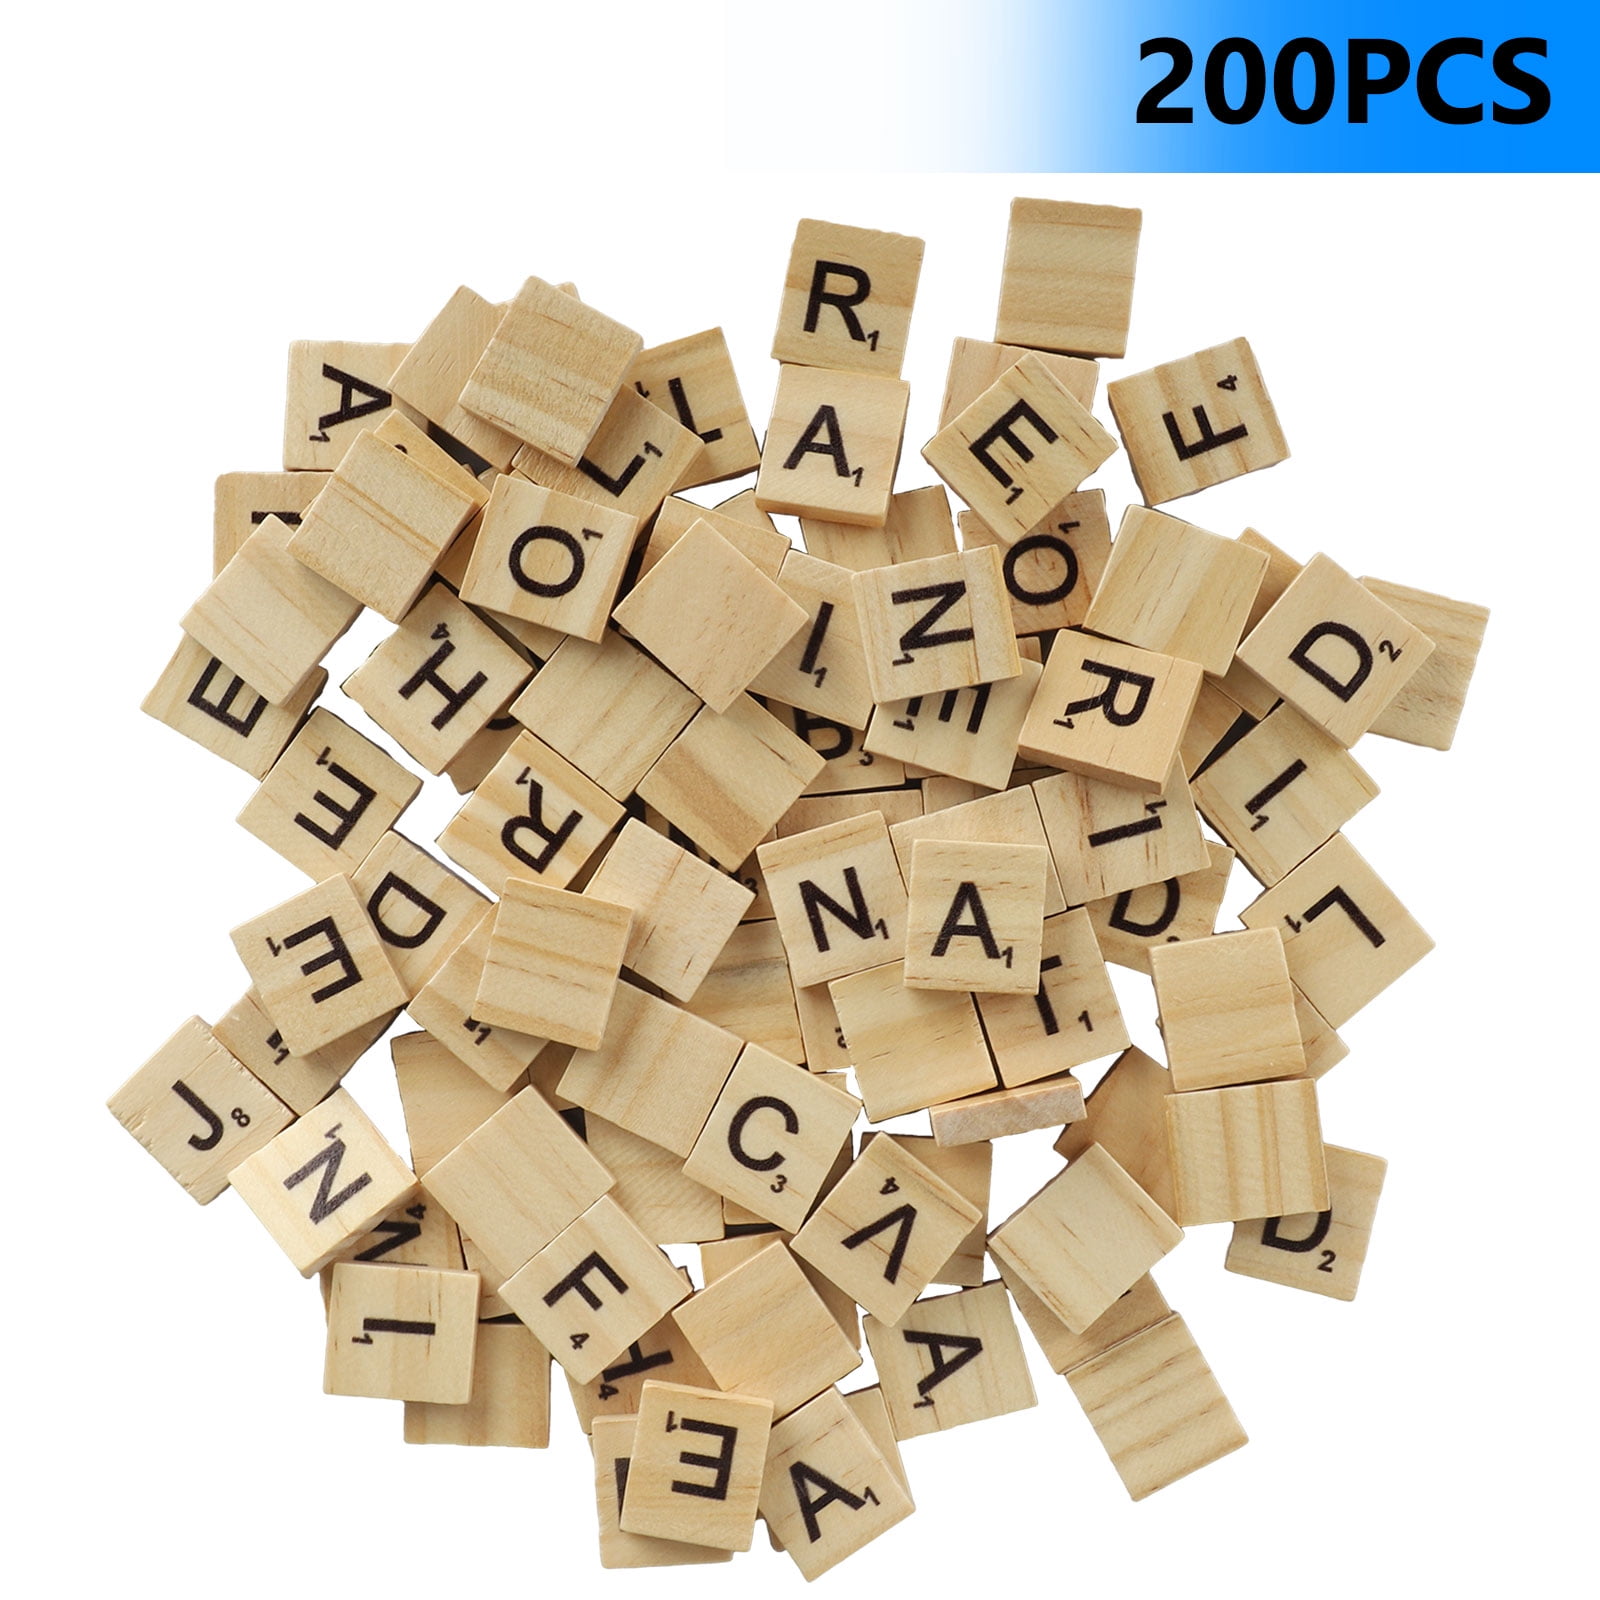 wooden spelling tiles ZYMY 500 wooden letter tiles 3 sets of 100 letters 2 sets of 100 numbers and symbols